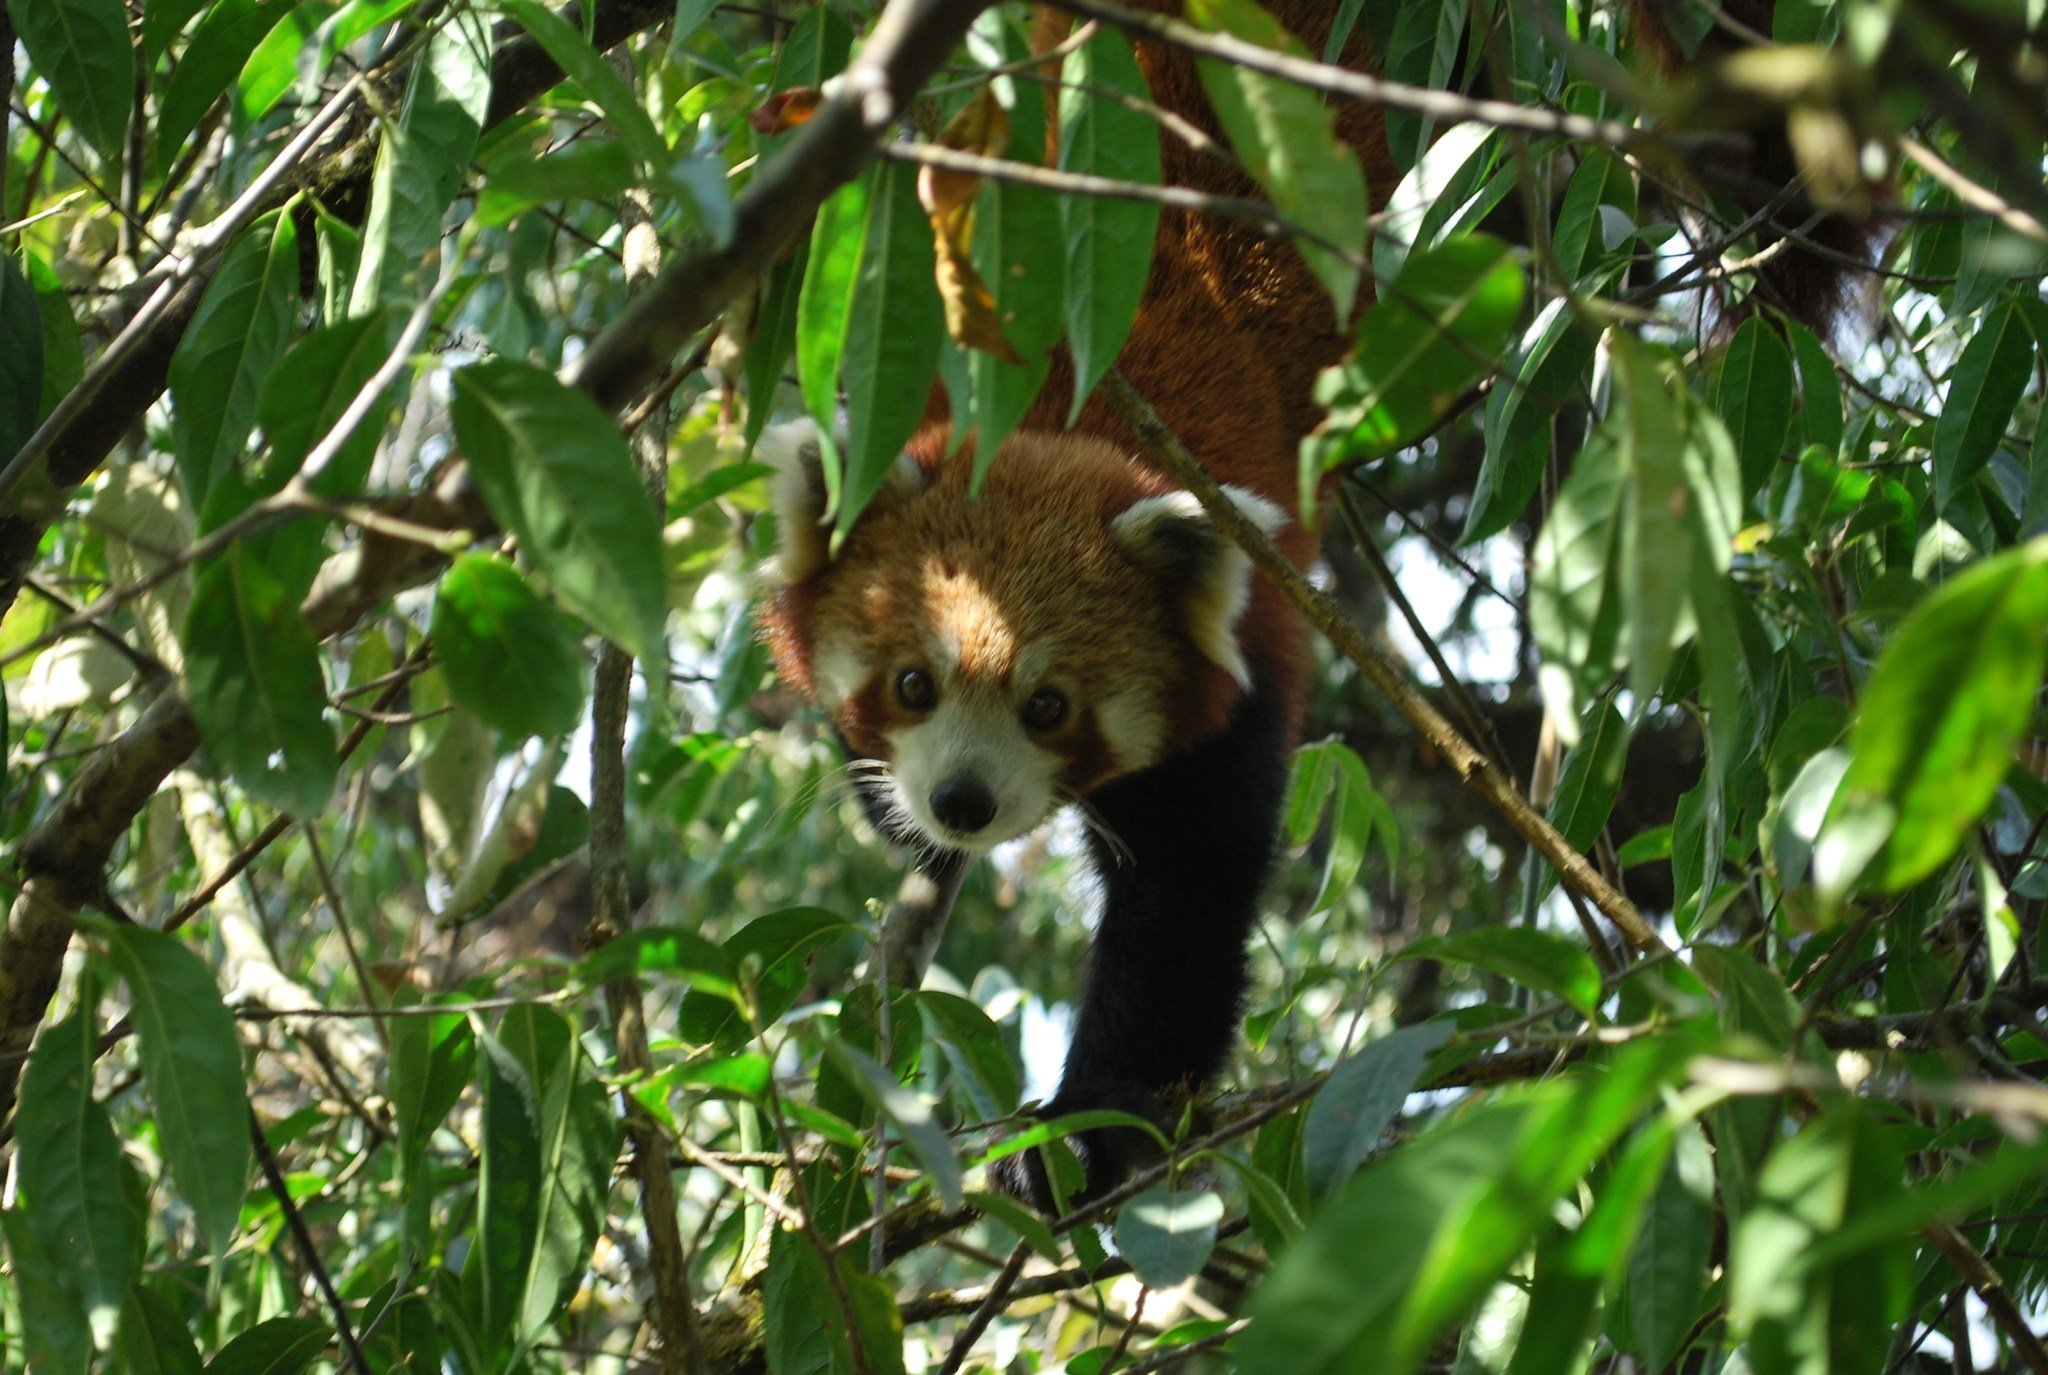 A red panda seen at Choyatar Community Forest, Jamuna Village Development Committee, Ilam. In Nepal, there are around 1,000 red pandas living in 24 of the country’s 77 districts, mostly in the eastern and western regions. Photo: Sonam Tashi Lama
